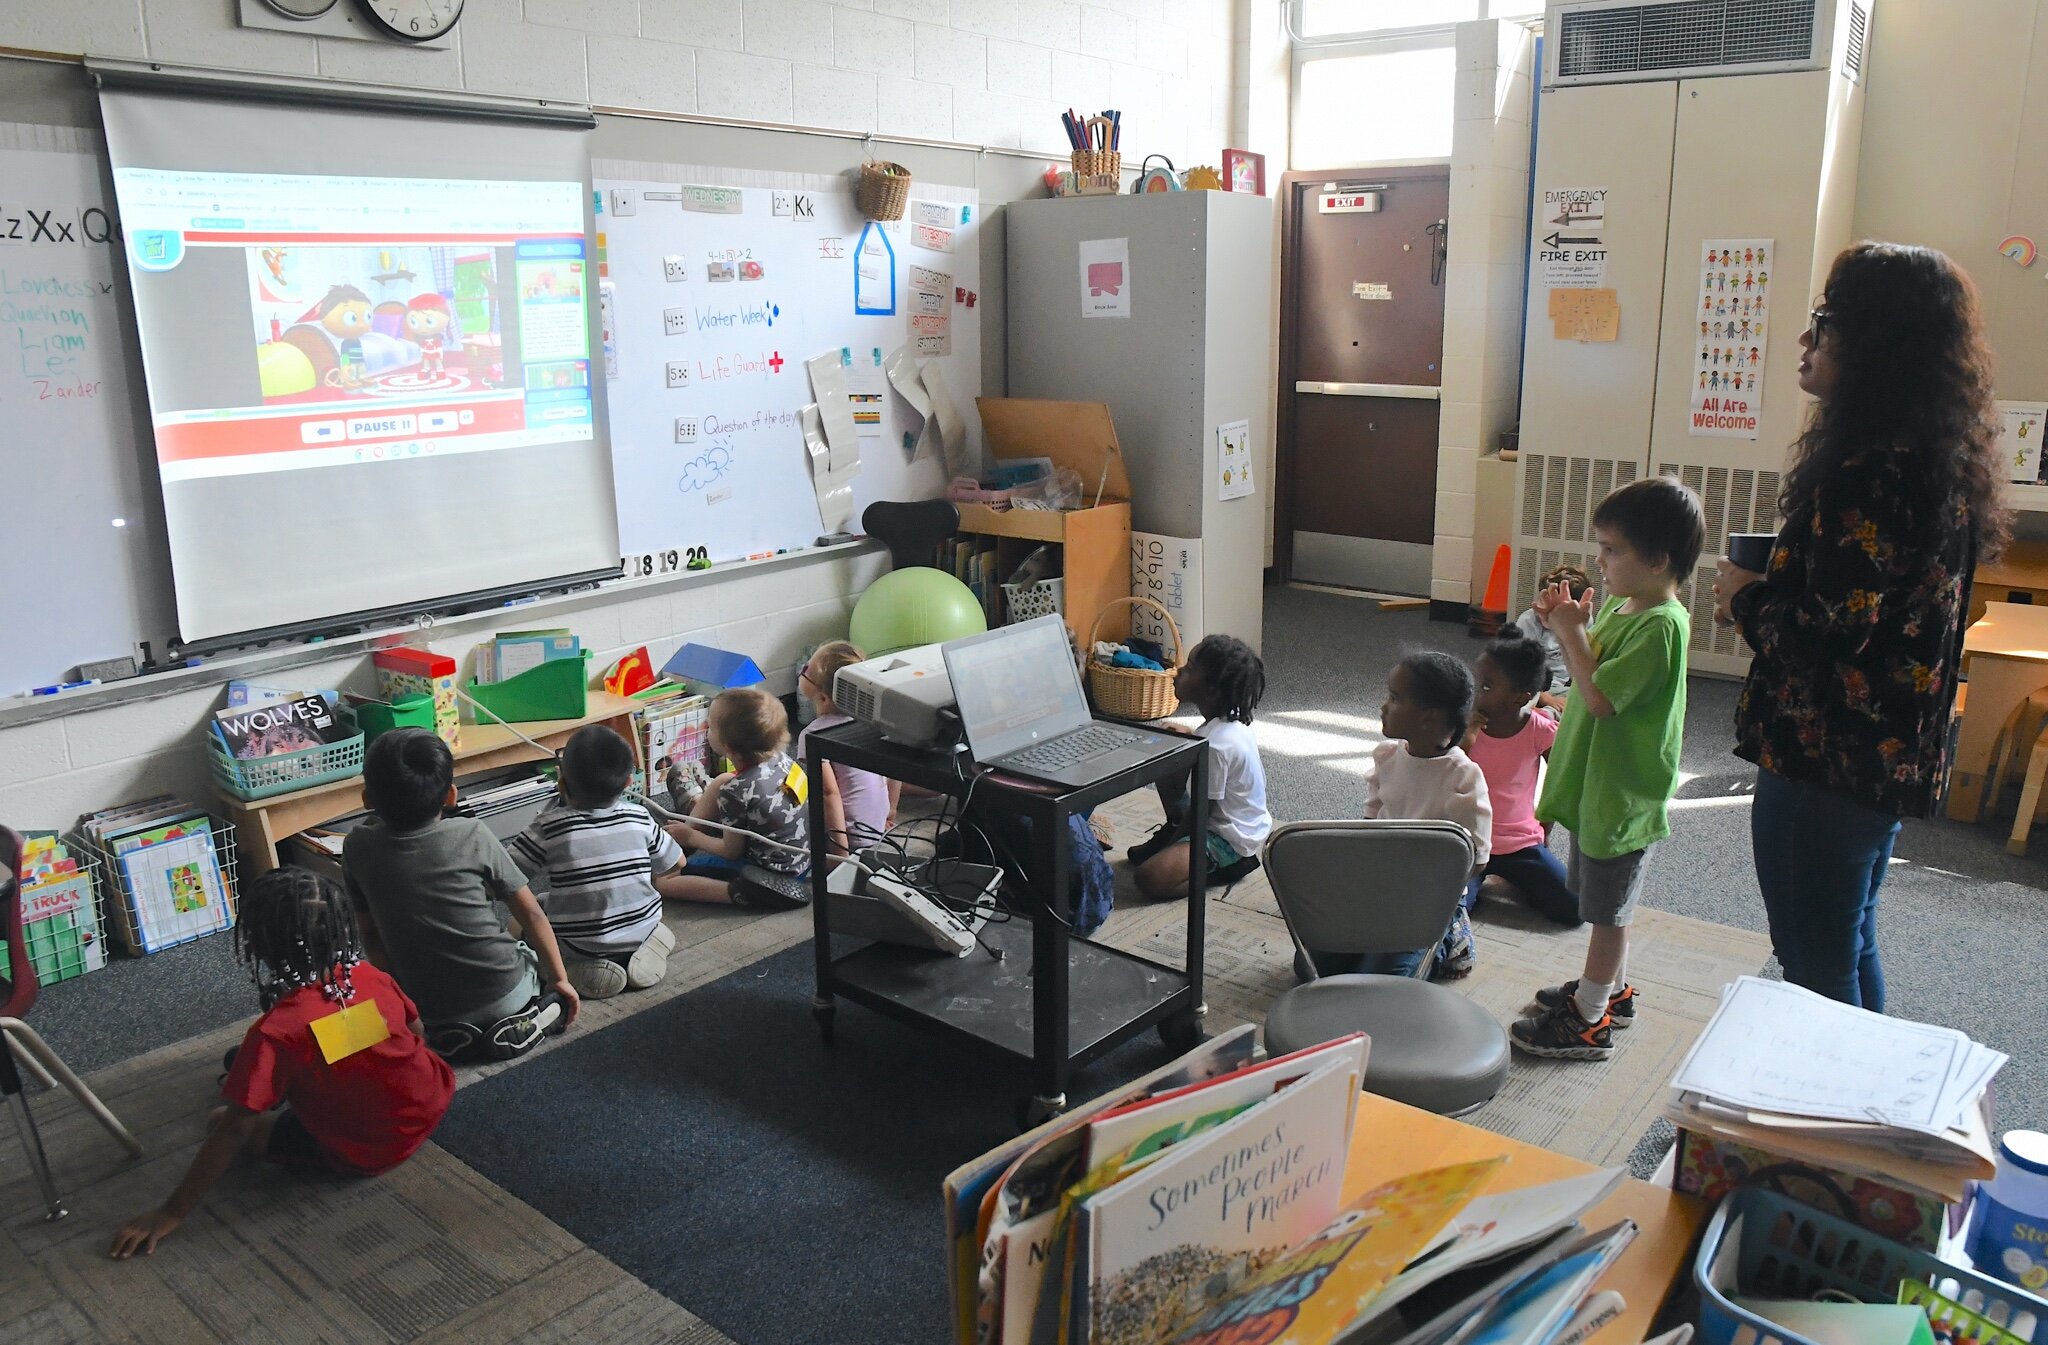 Students watch a video during a morning session at Franklin-Post Elementary School.